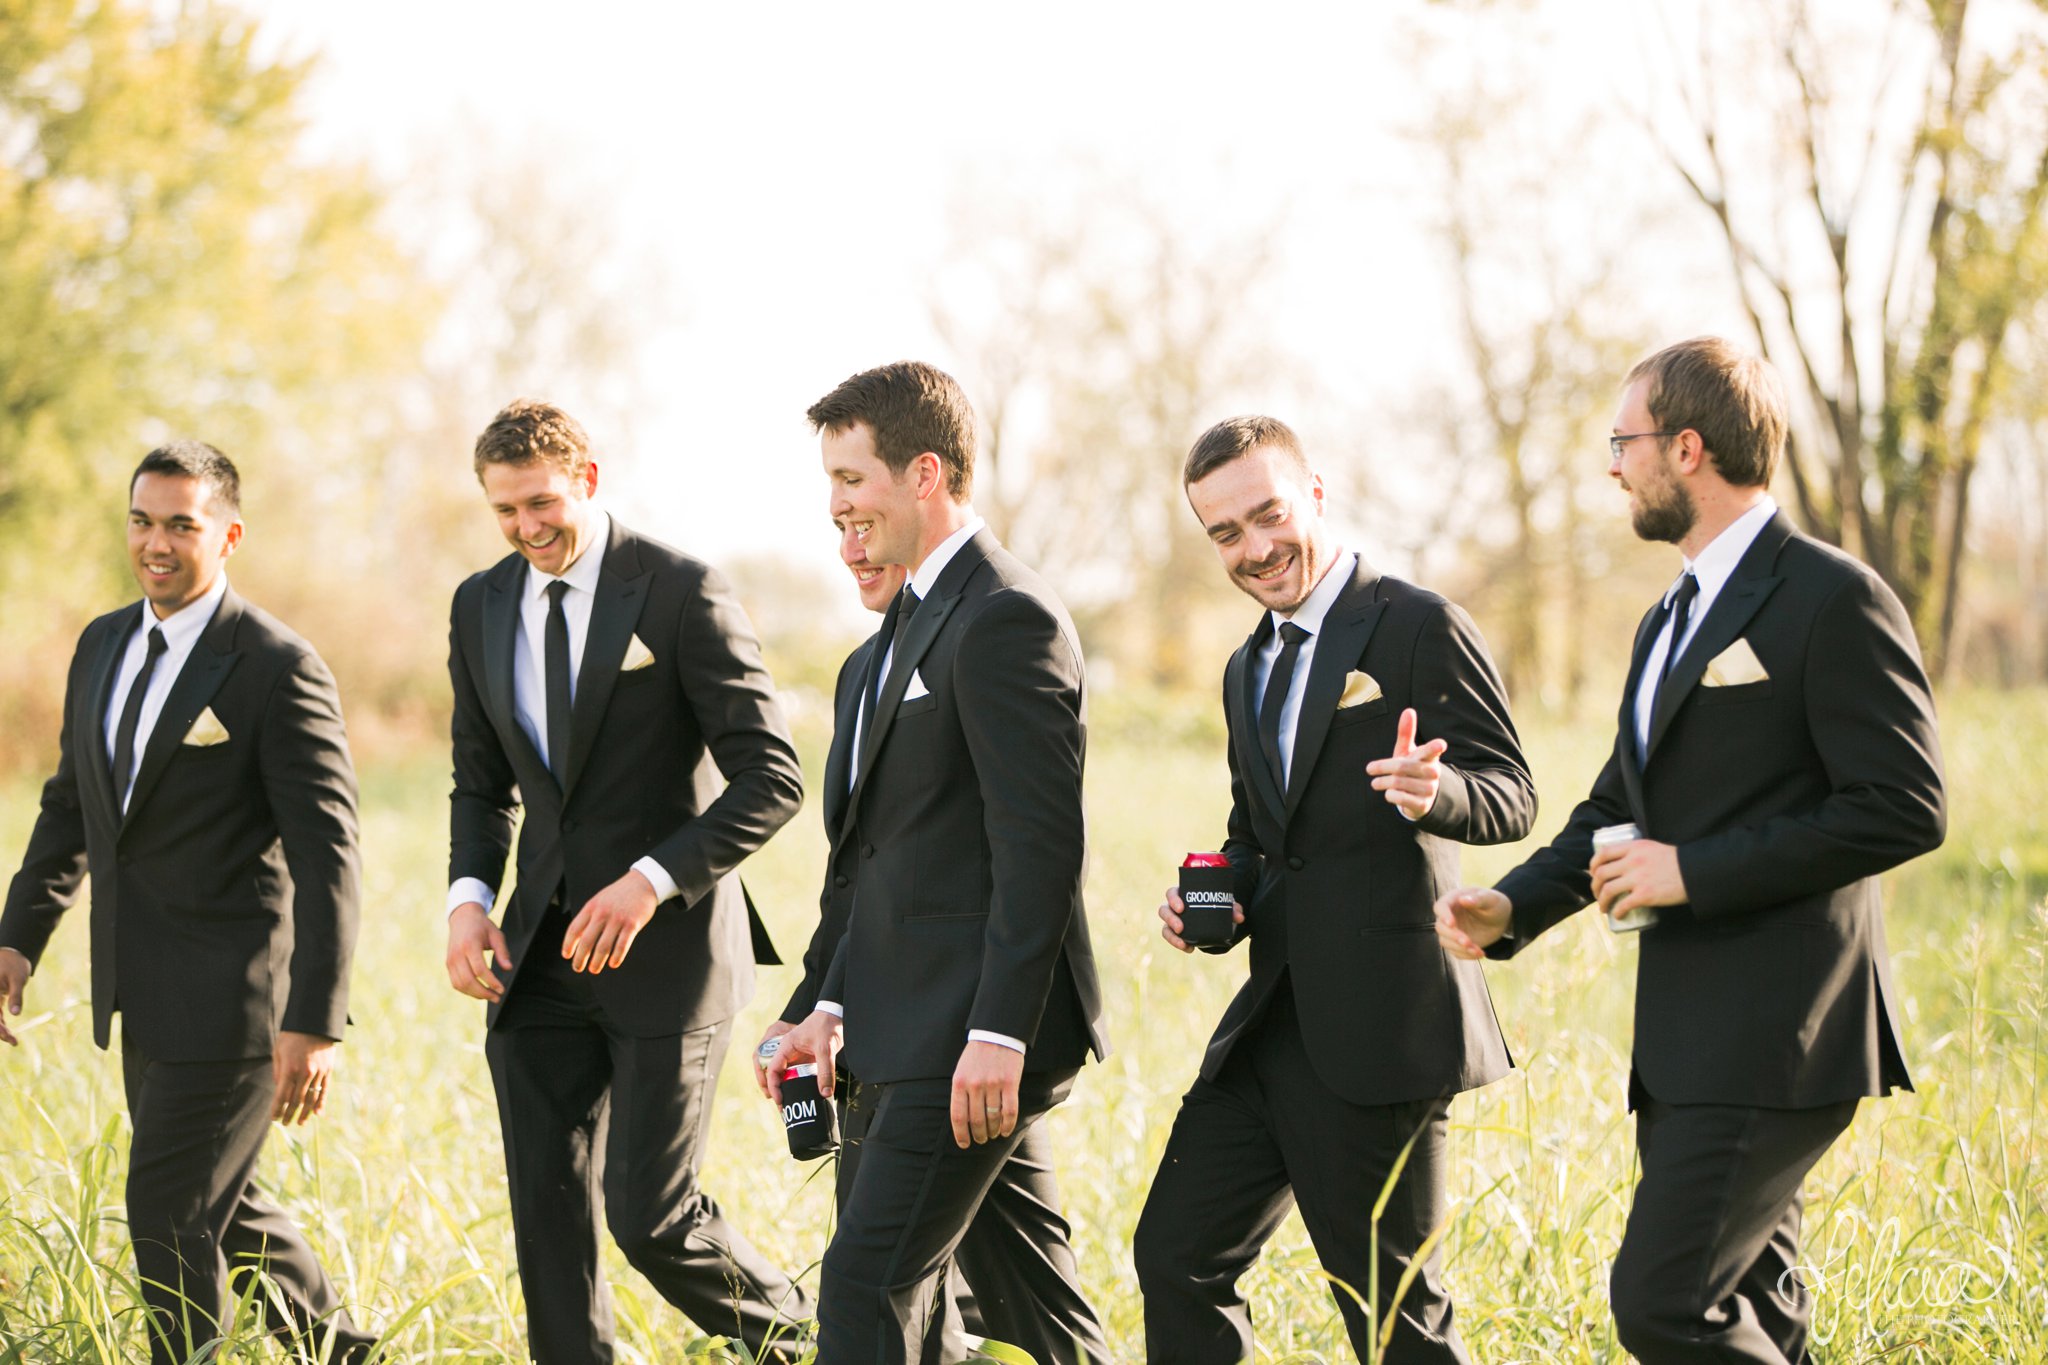 weddings | wedding photos | wedding photography | images by feliciathephotographer.com | St. Therese Catholic Church | Kansas City | downtown | The Terrace on Grand | bridal party portraits | grassy field | field | nature | candid | groomsmen portrait | laughing | walking | jokes | funny groomsmen | The Black Tux 